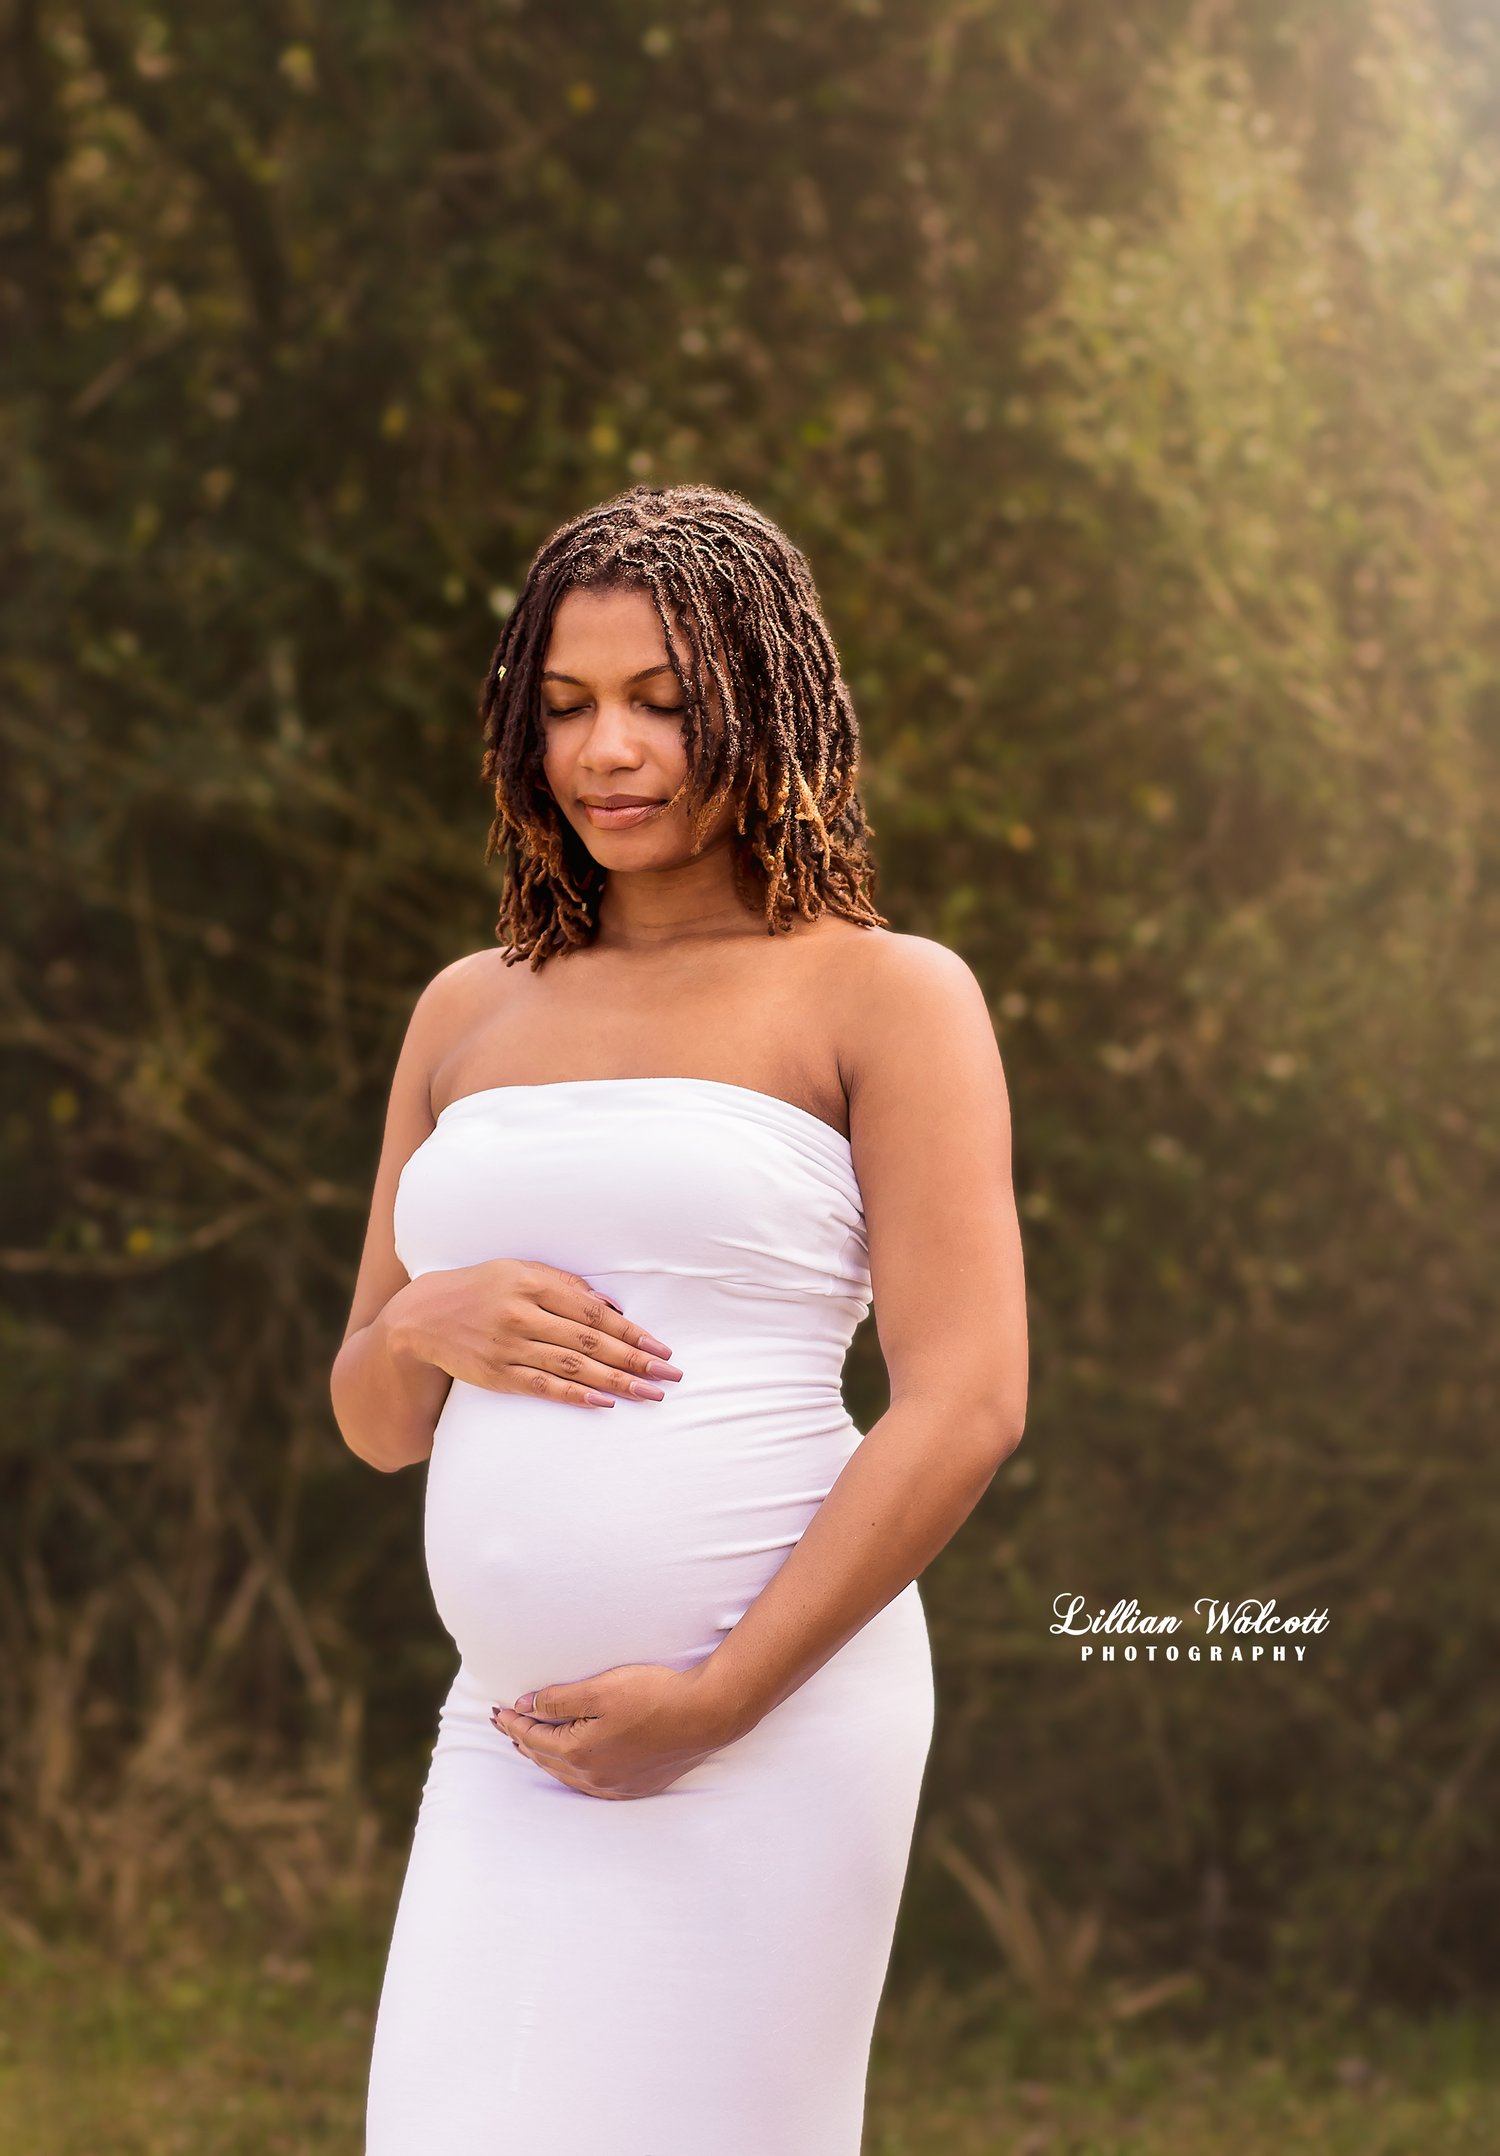 Image of Outdoor Maternity Session (30 Minutes)